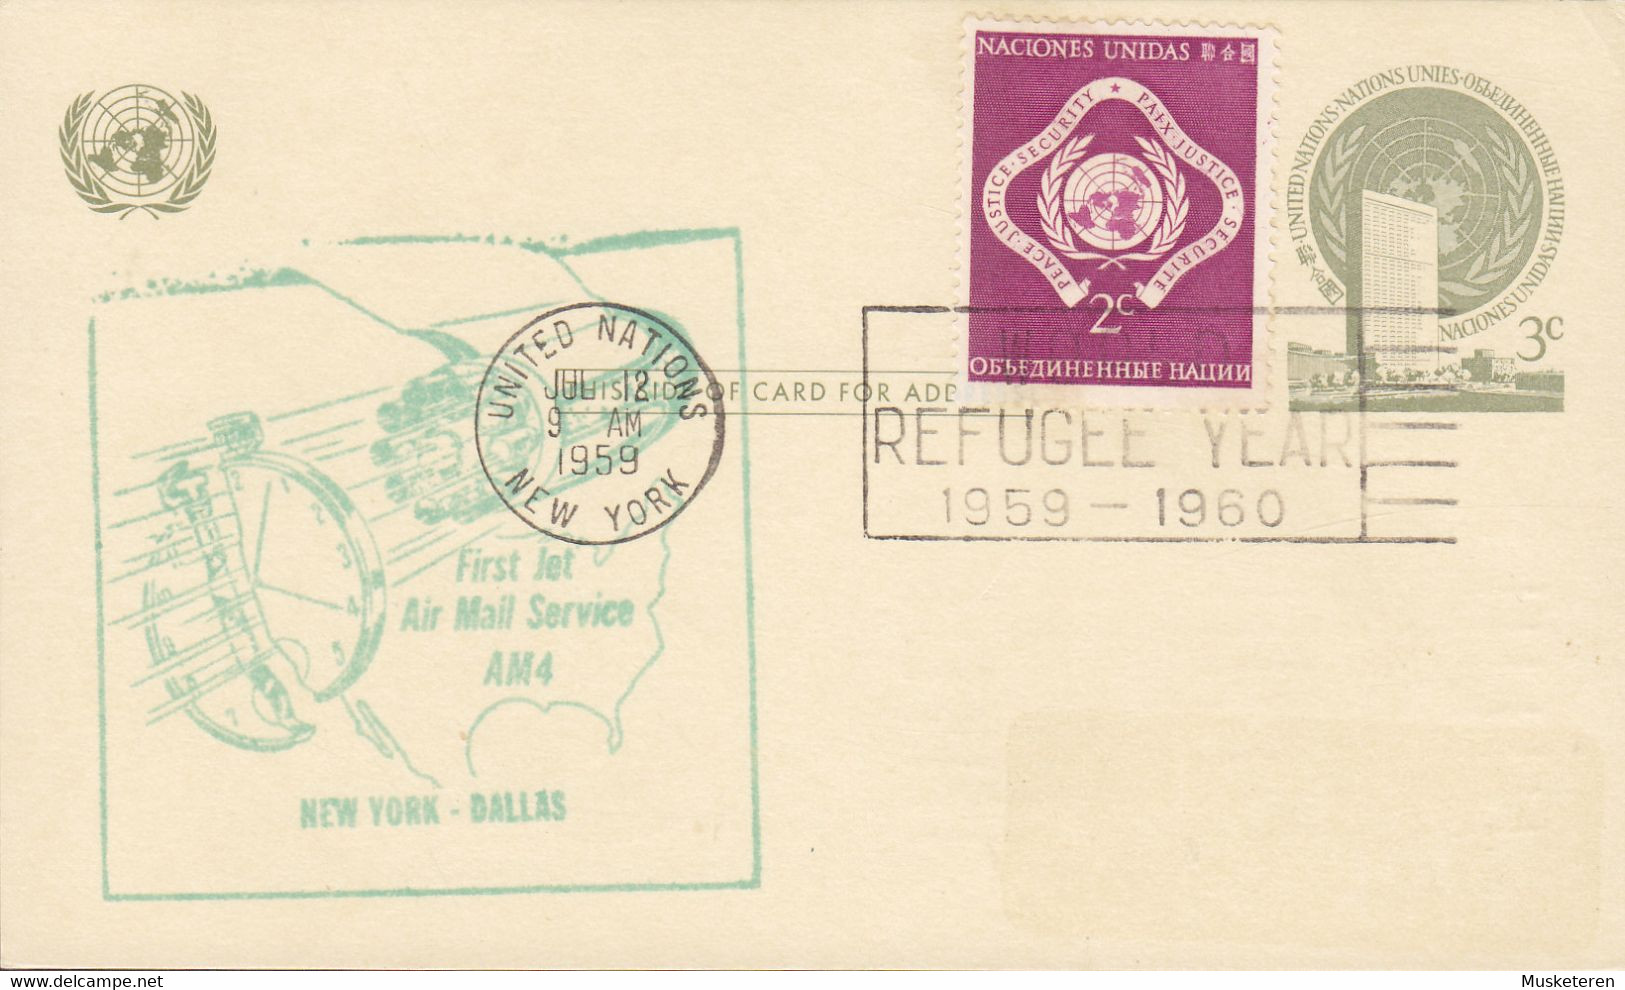 United Nations Uprated Postal Stationery Ganzsache First Jet Air Mail Service Flight NEW YORK - DALLAS, NEW YORK 1959 - Covers & Documents